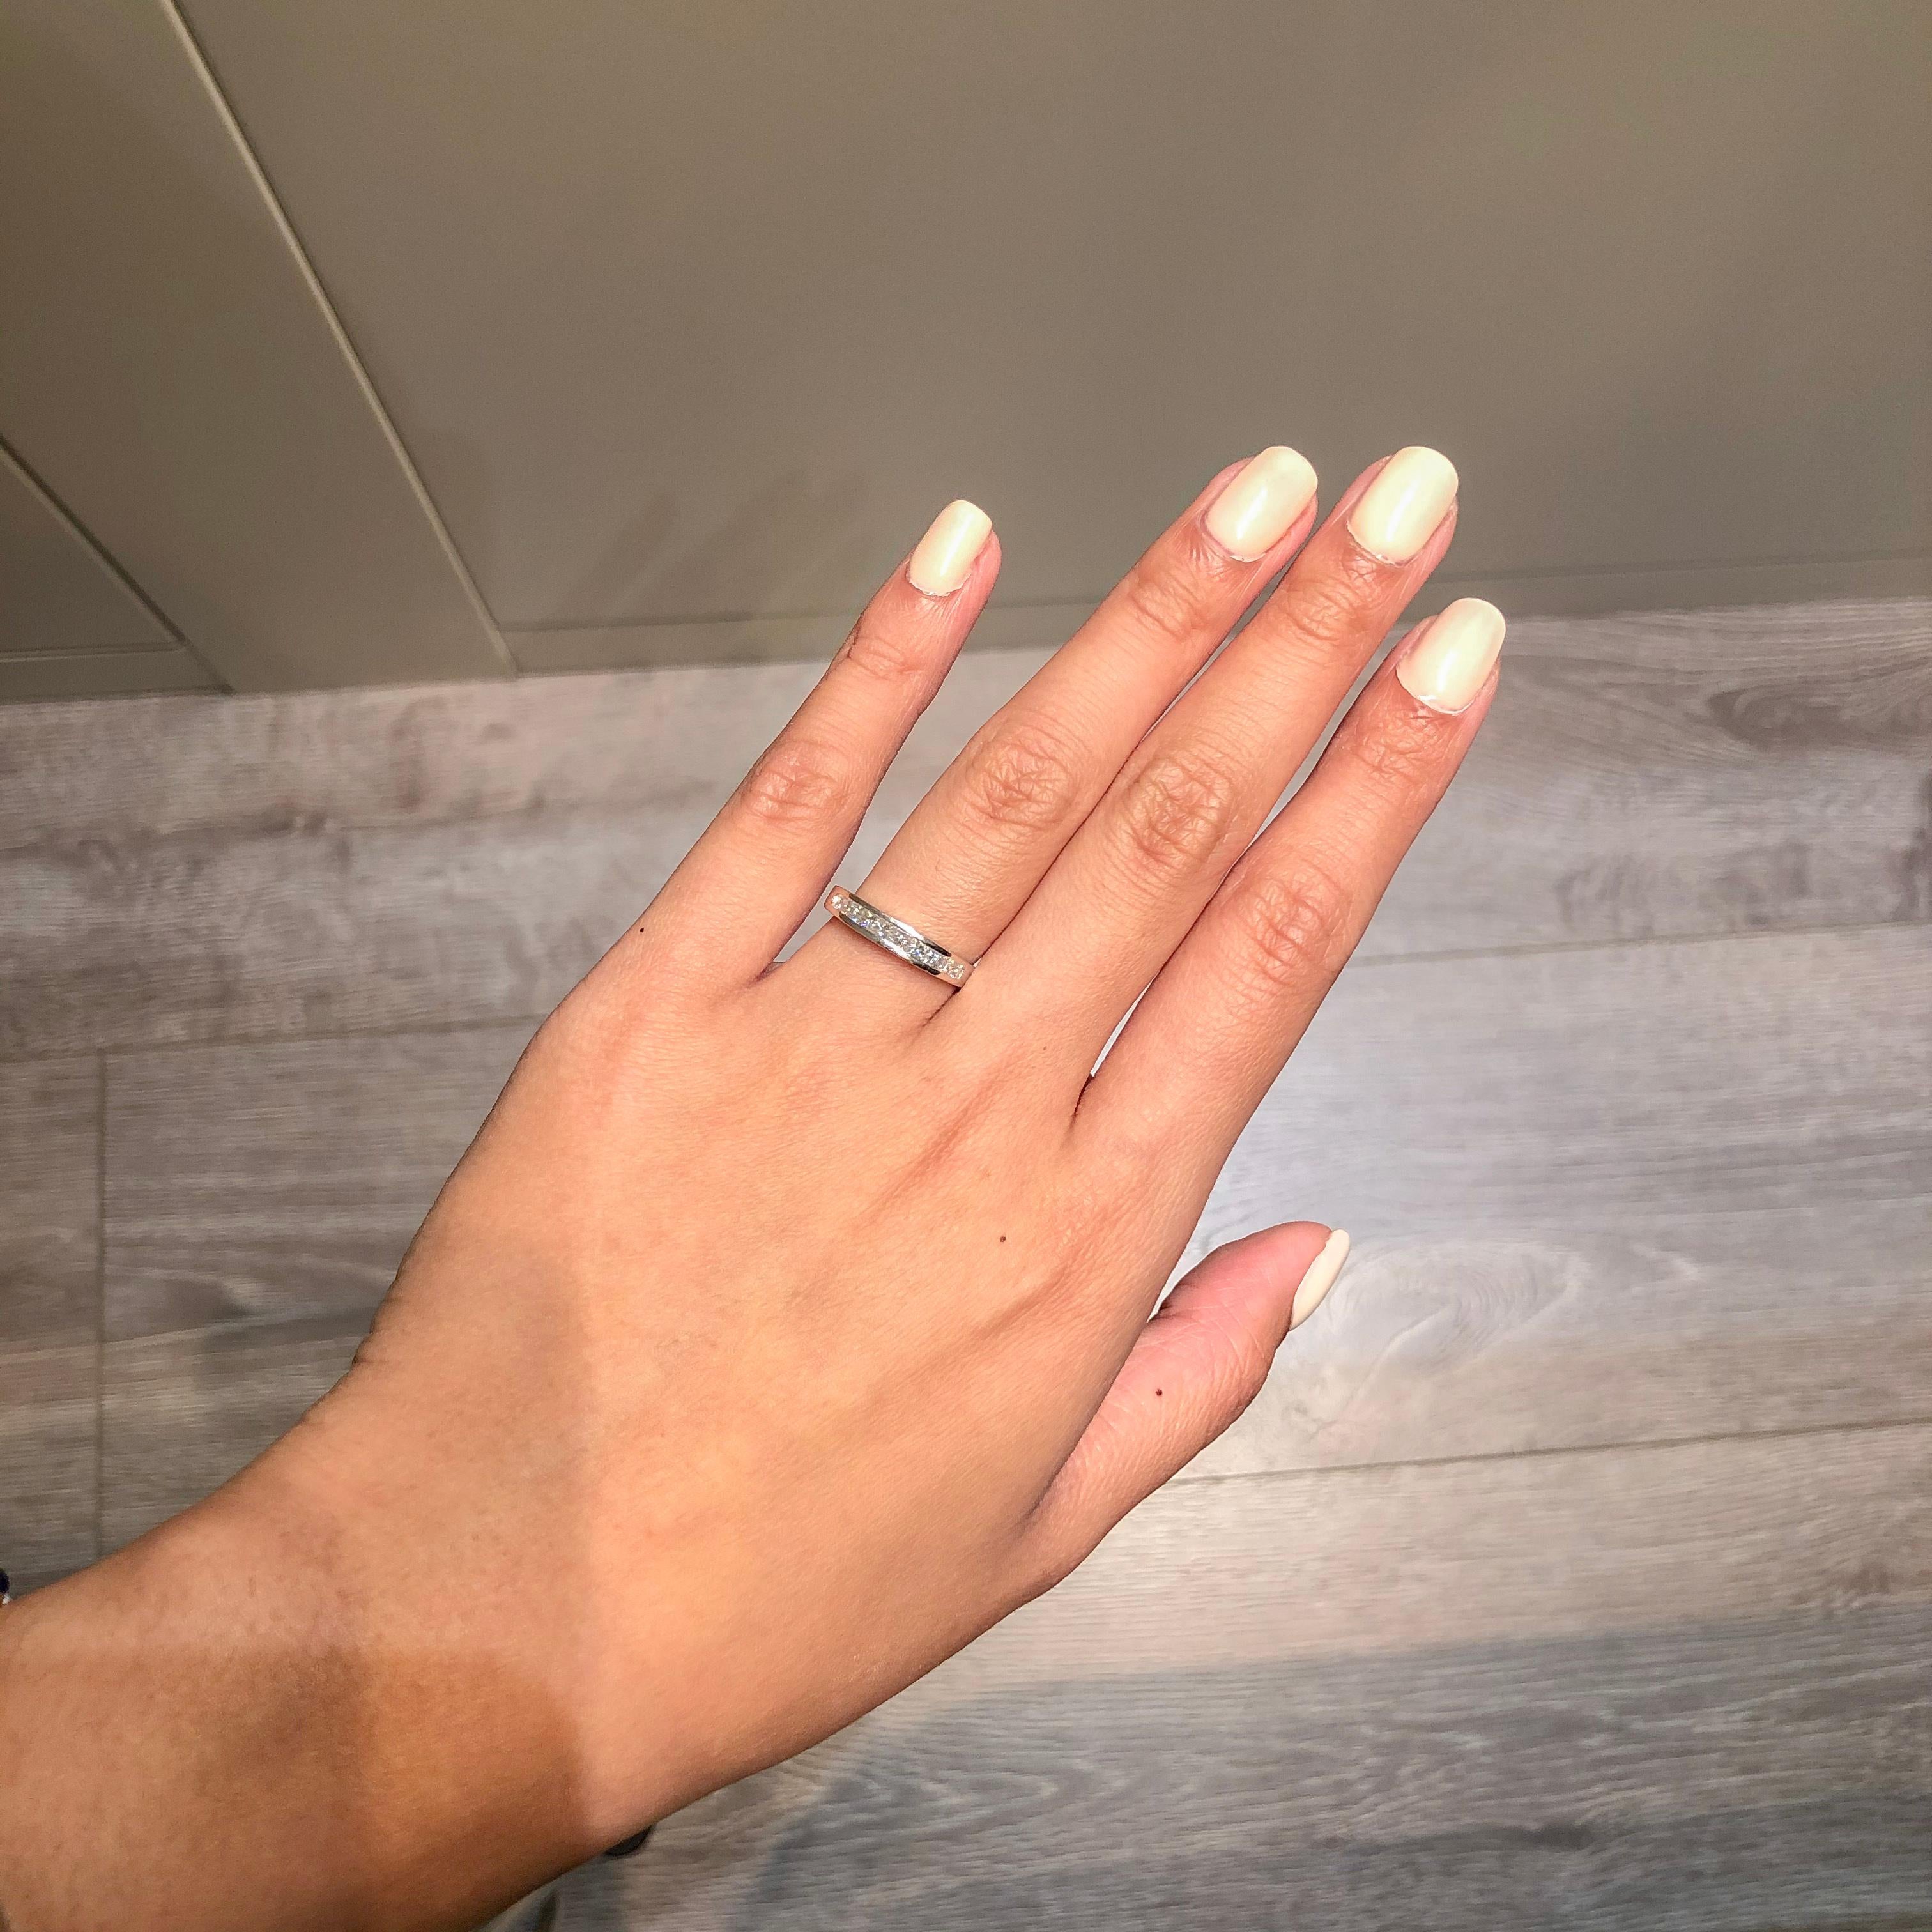 A simple wedding band featuring 10 brilliant princess cut diamonds weighing 0.56 carats total channel set in a polished platinum composition. A perfect ring for stacking or complimenting an engagement ring.

Style available in different price